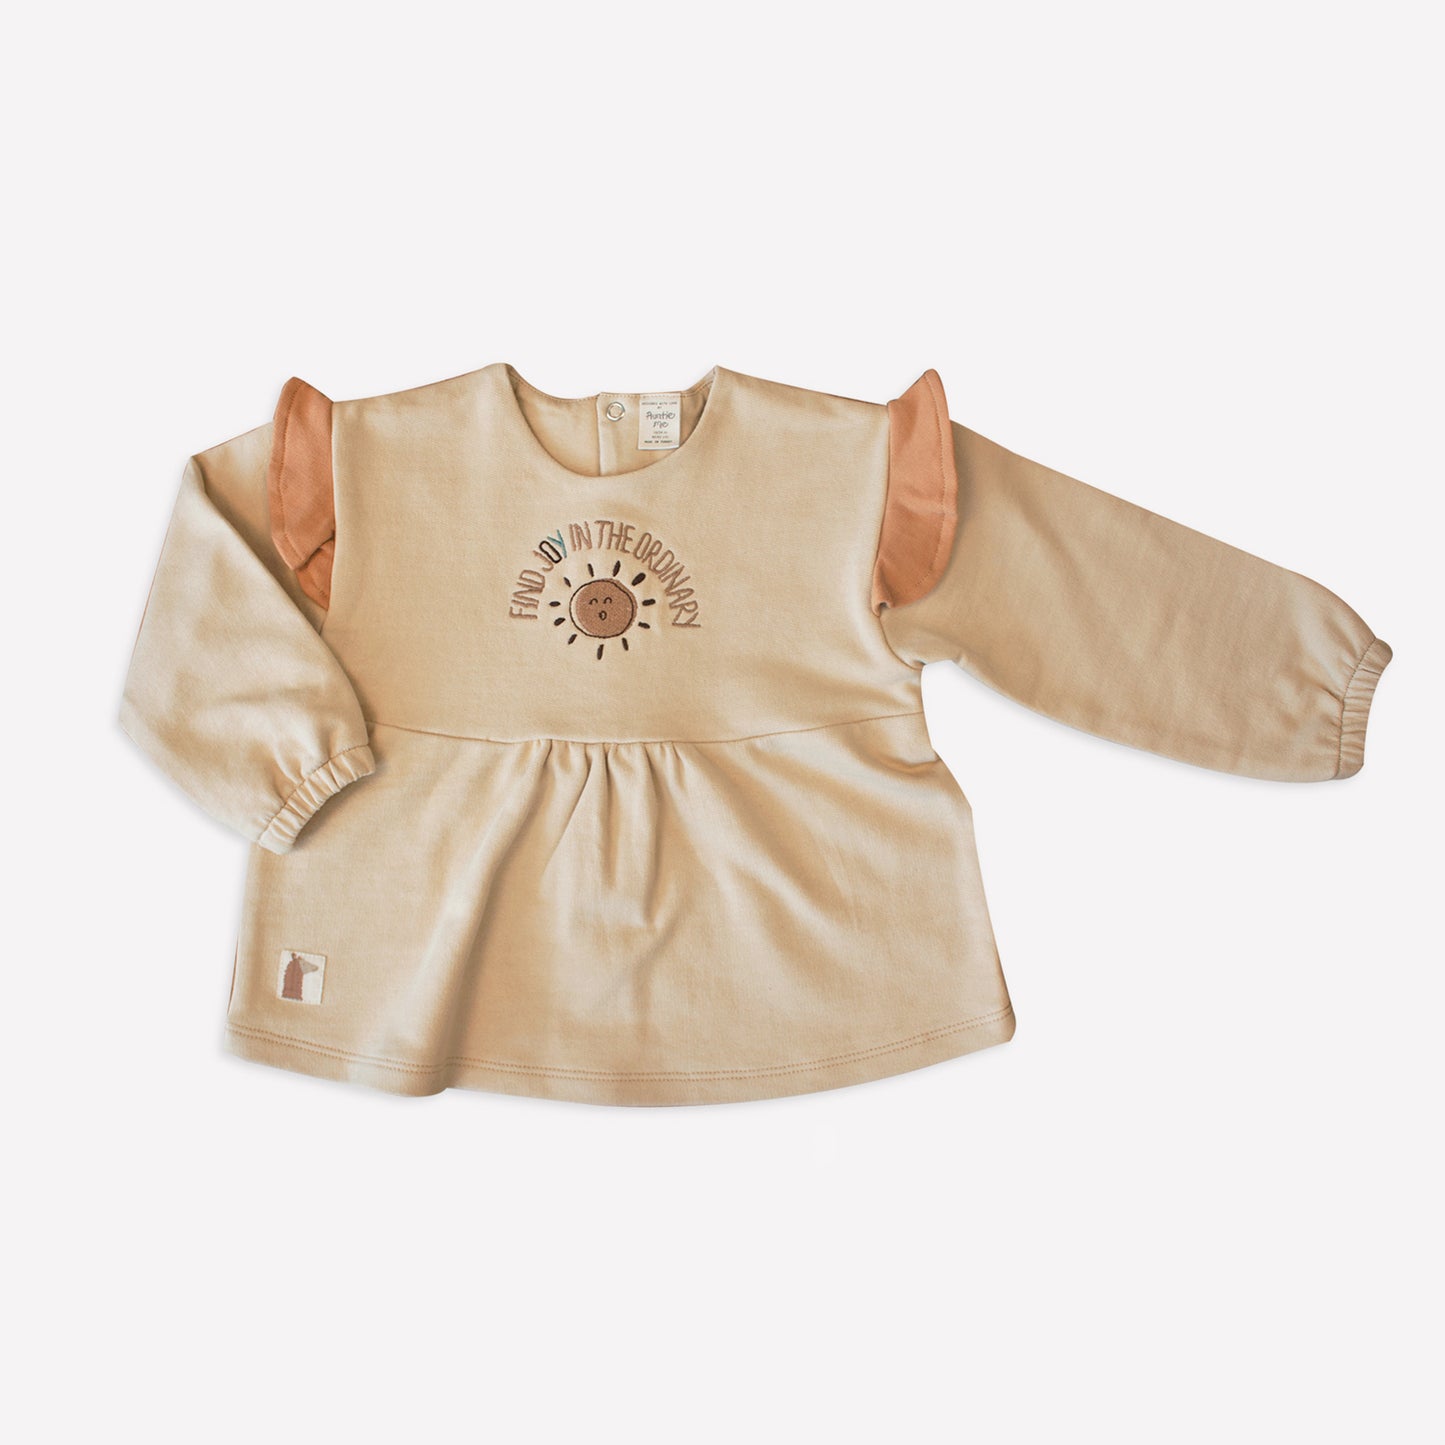 ’FIND JOY IN THE ORDINARY’ FRILL TOP - Aged 3m to 2 Yrs